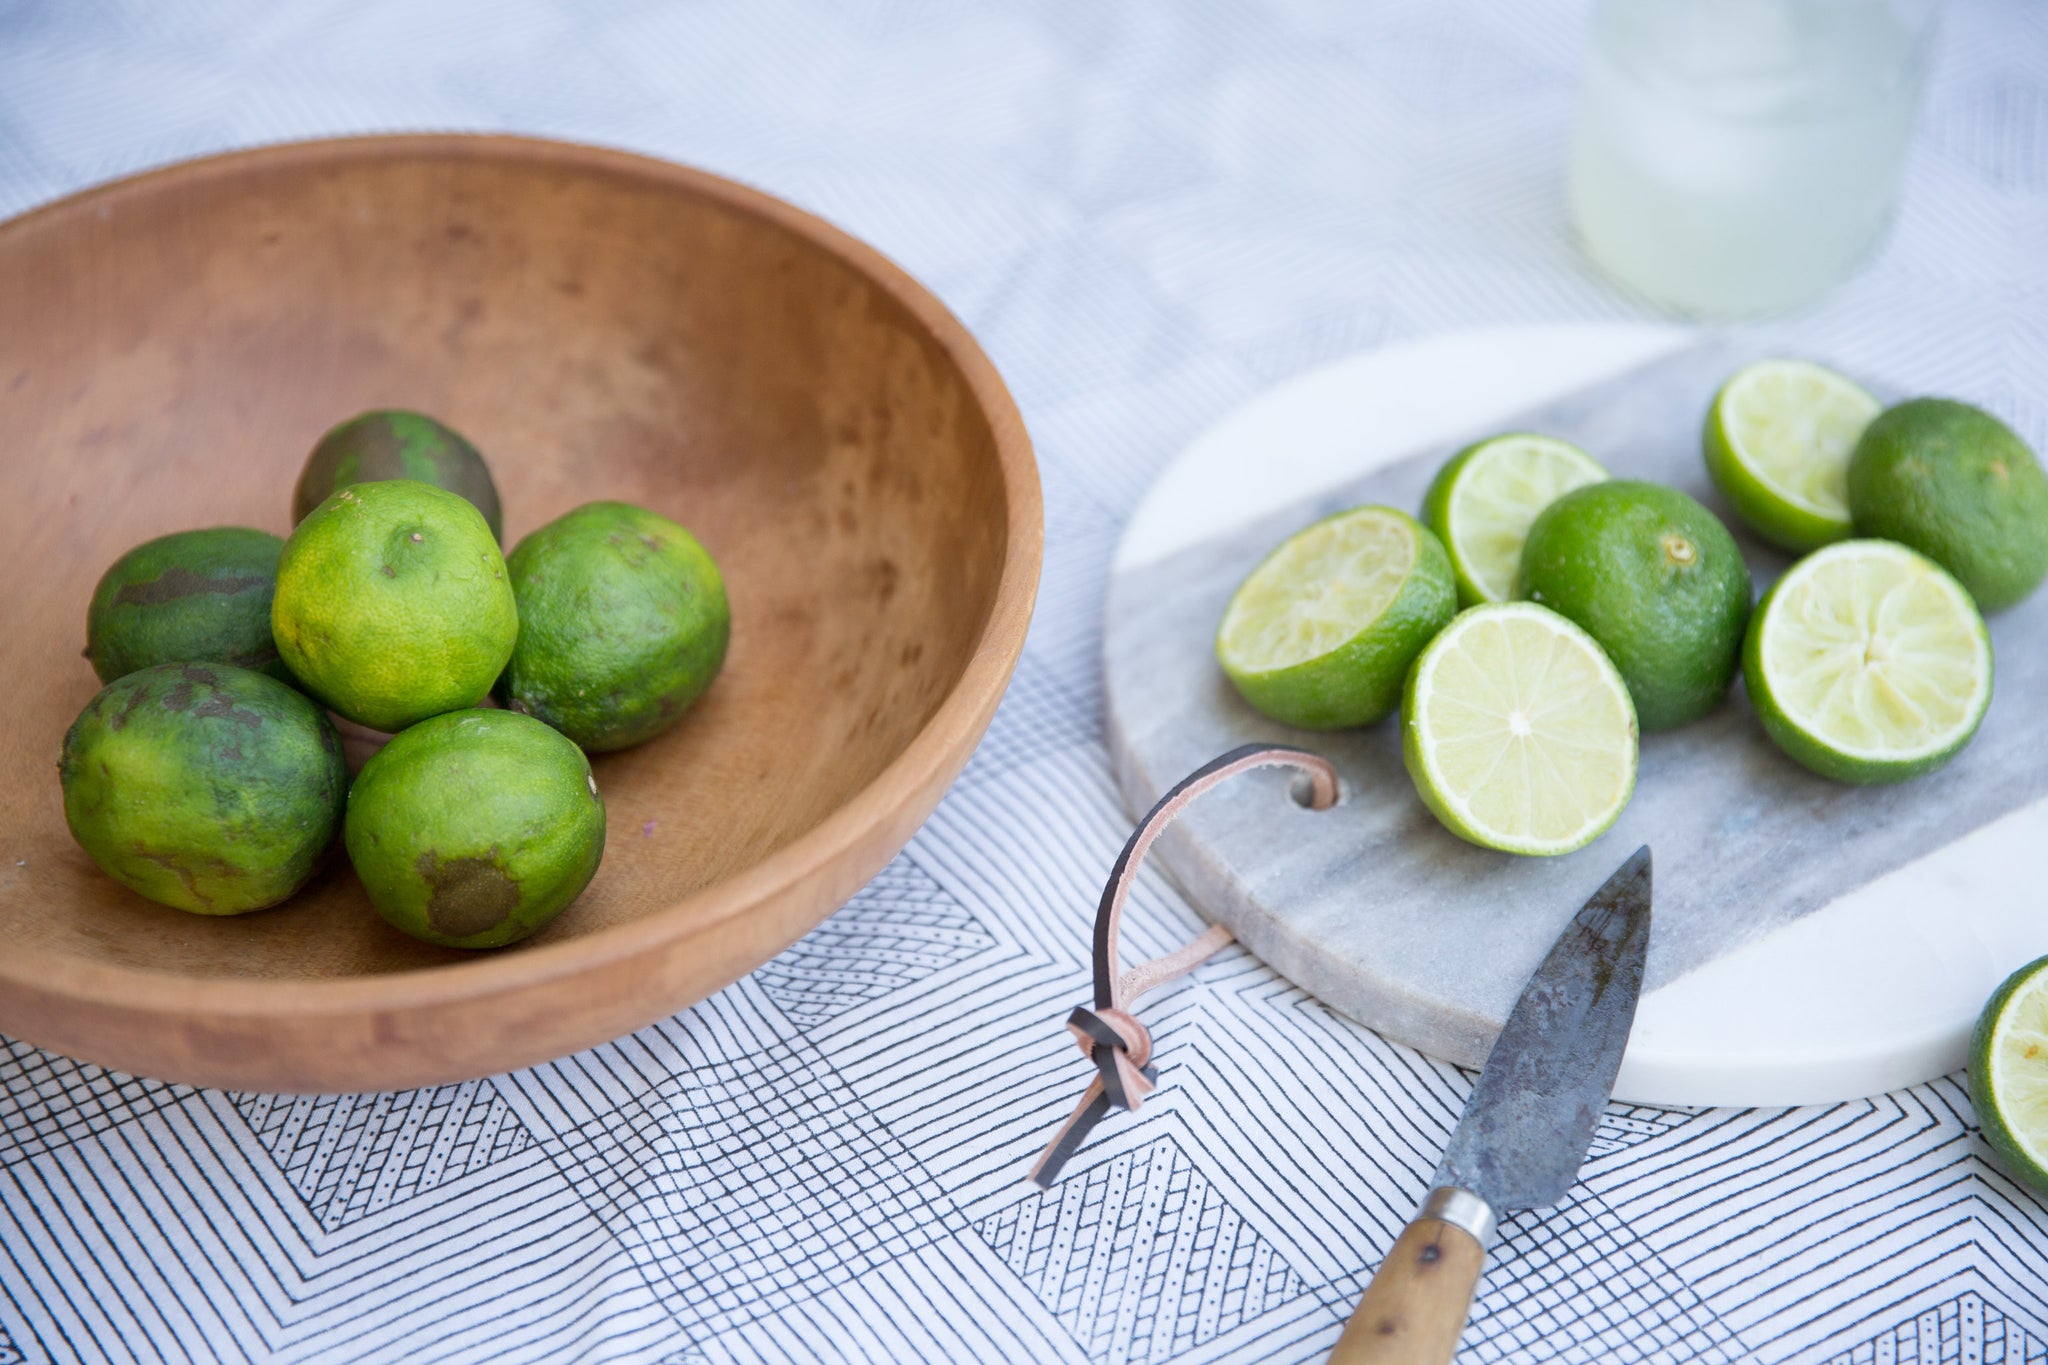 wooden bowl and cutting board holding limes